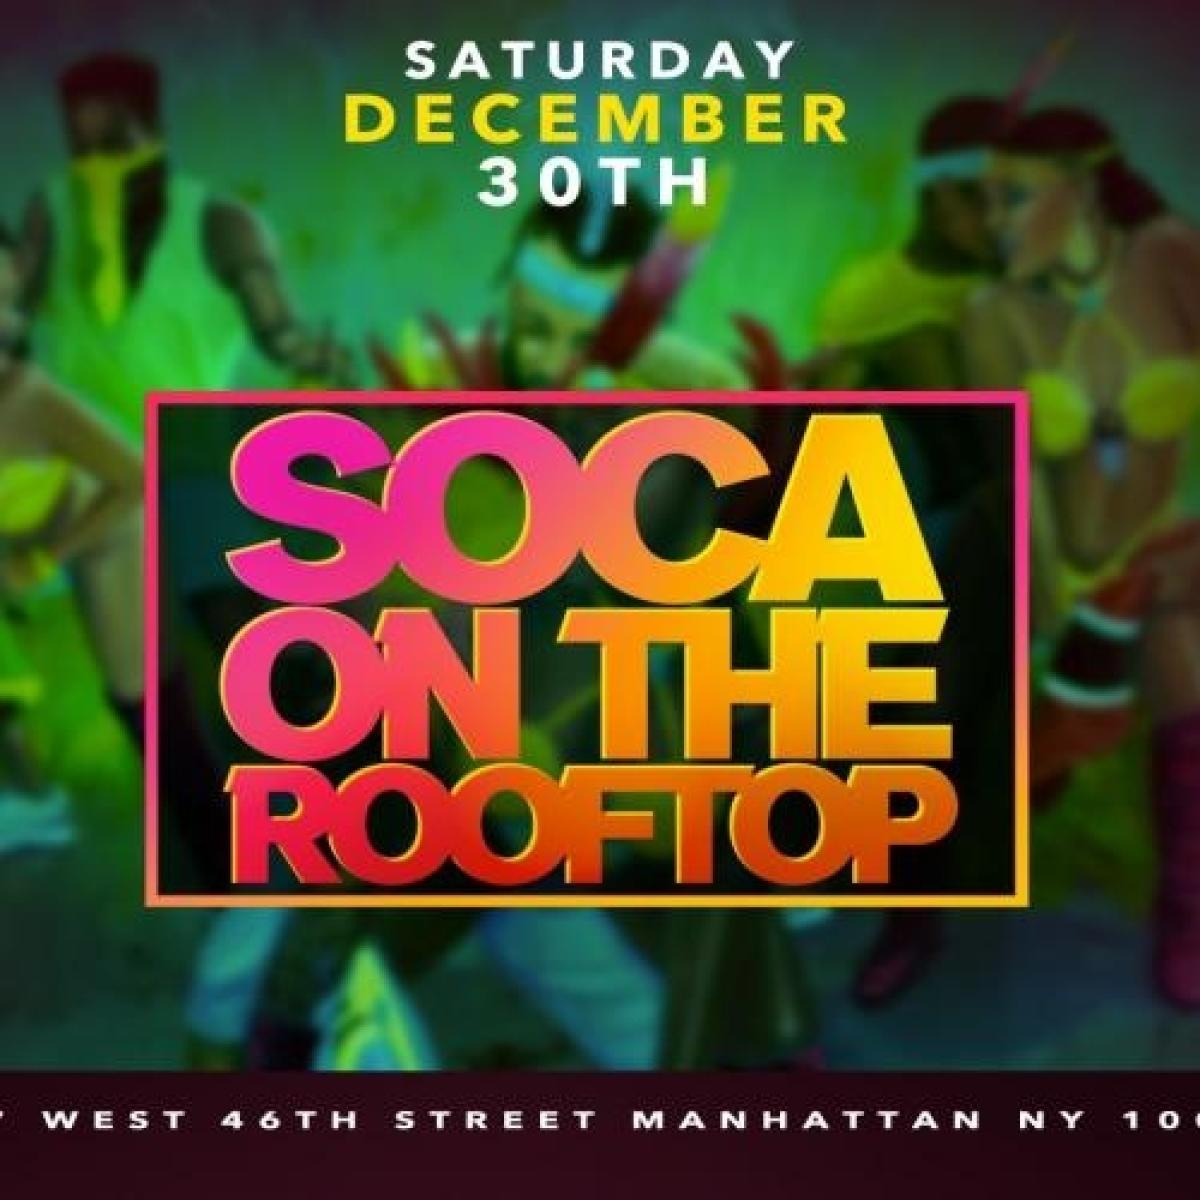 Soca on the Rooftop flyer or graphic.